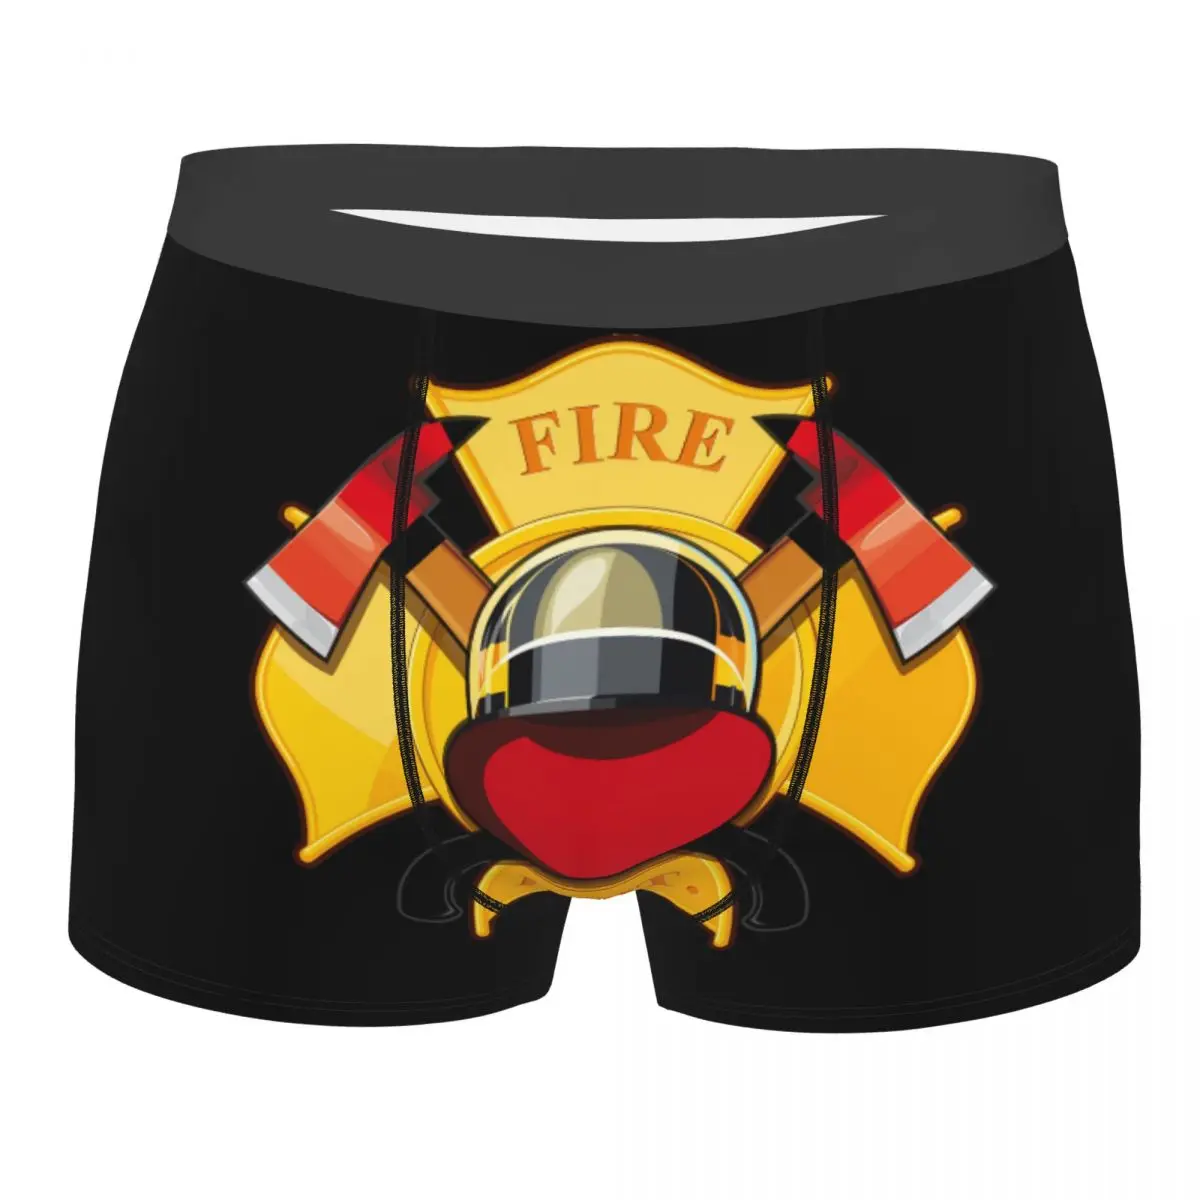 firefighter Fire Department Badge Mencosy Boxer Briefs Underpants Highly Breathable High Quality Birthday Gifts dog fire pitbull from hell underpants breathbale panties male underwear print shorts boxer briefs